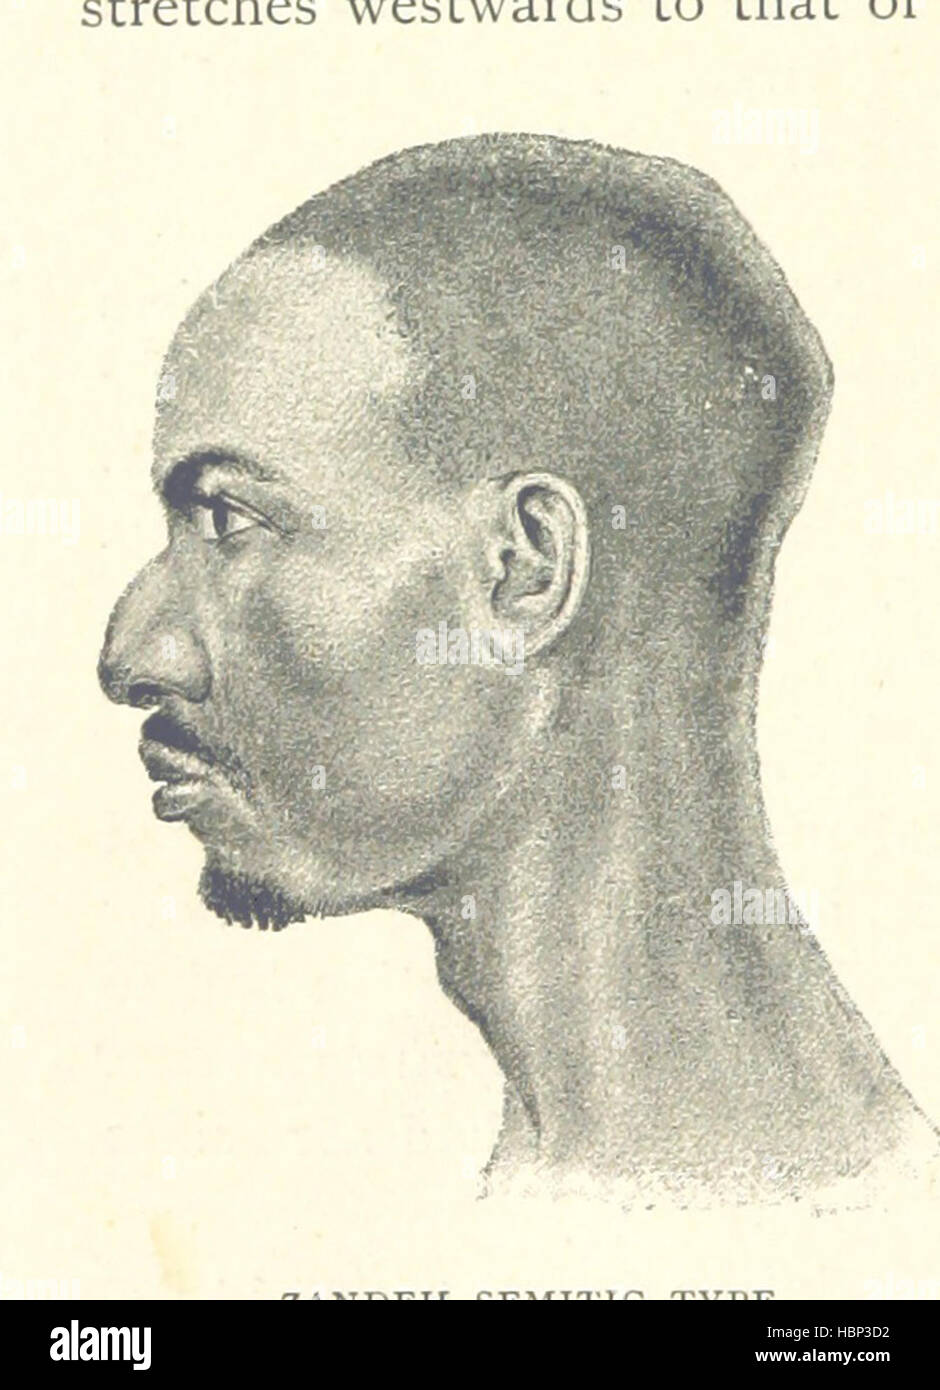 Image taken from page 262 of 'Travels in Africa during the years 1875-1878 (1879-1883-1882-1886) ... Translated from the German by A. H. Keane ... Illustrated' Image taken from page 262 of 'Travels in Africa during Stock Photo